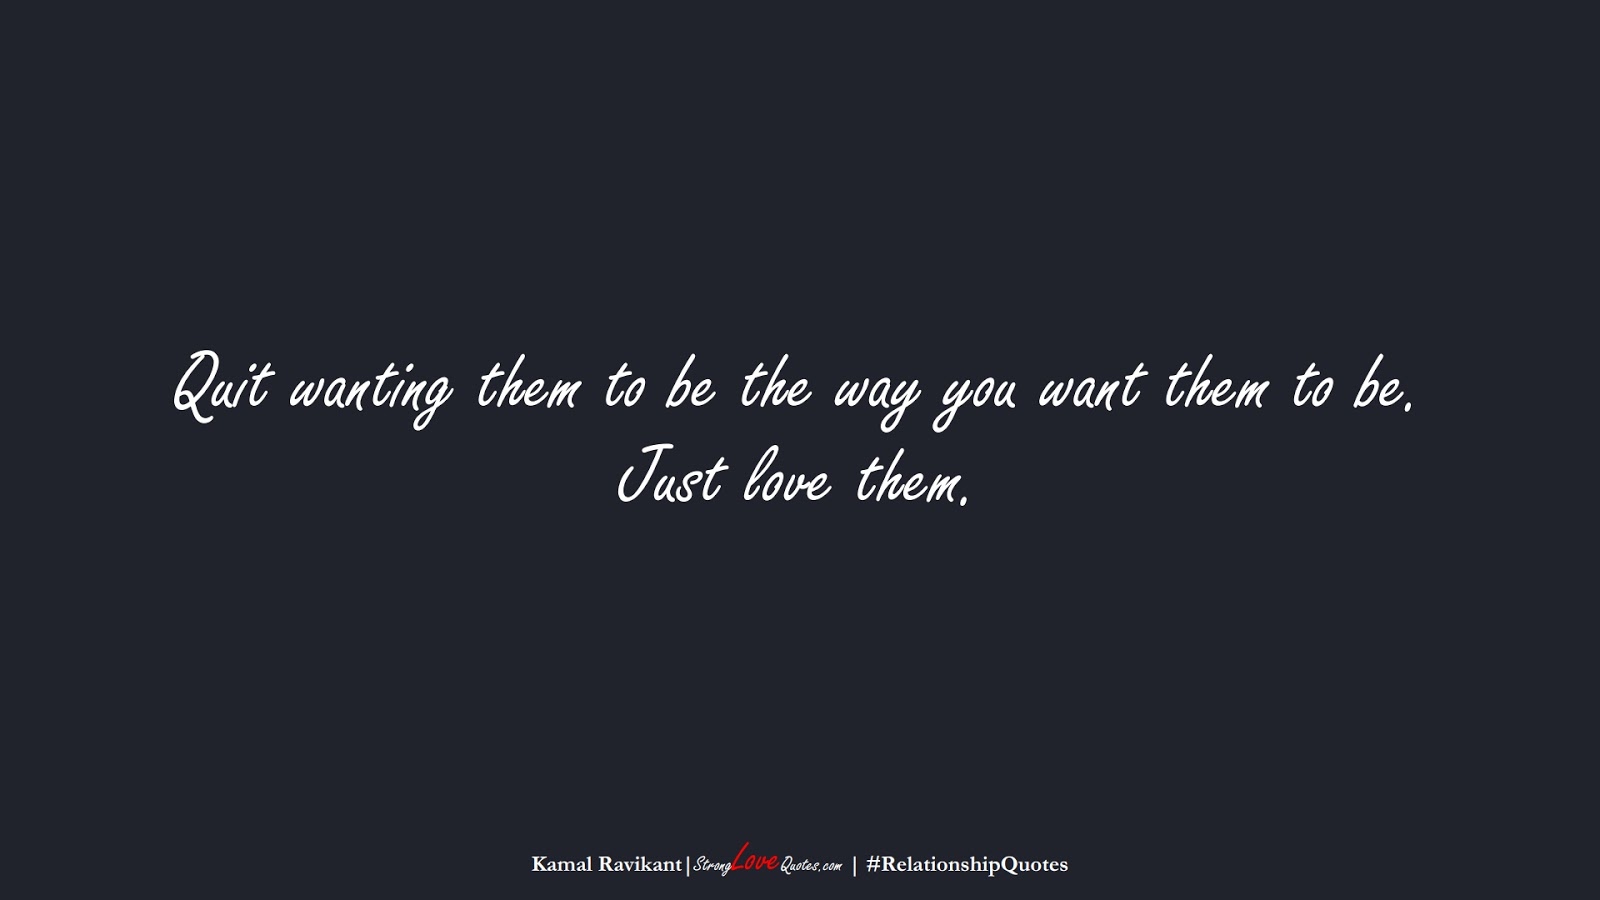 Quit wanting them to be the way you want them to be. Just love them. (Kamal Ravikant);  #RelationshipQuotes